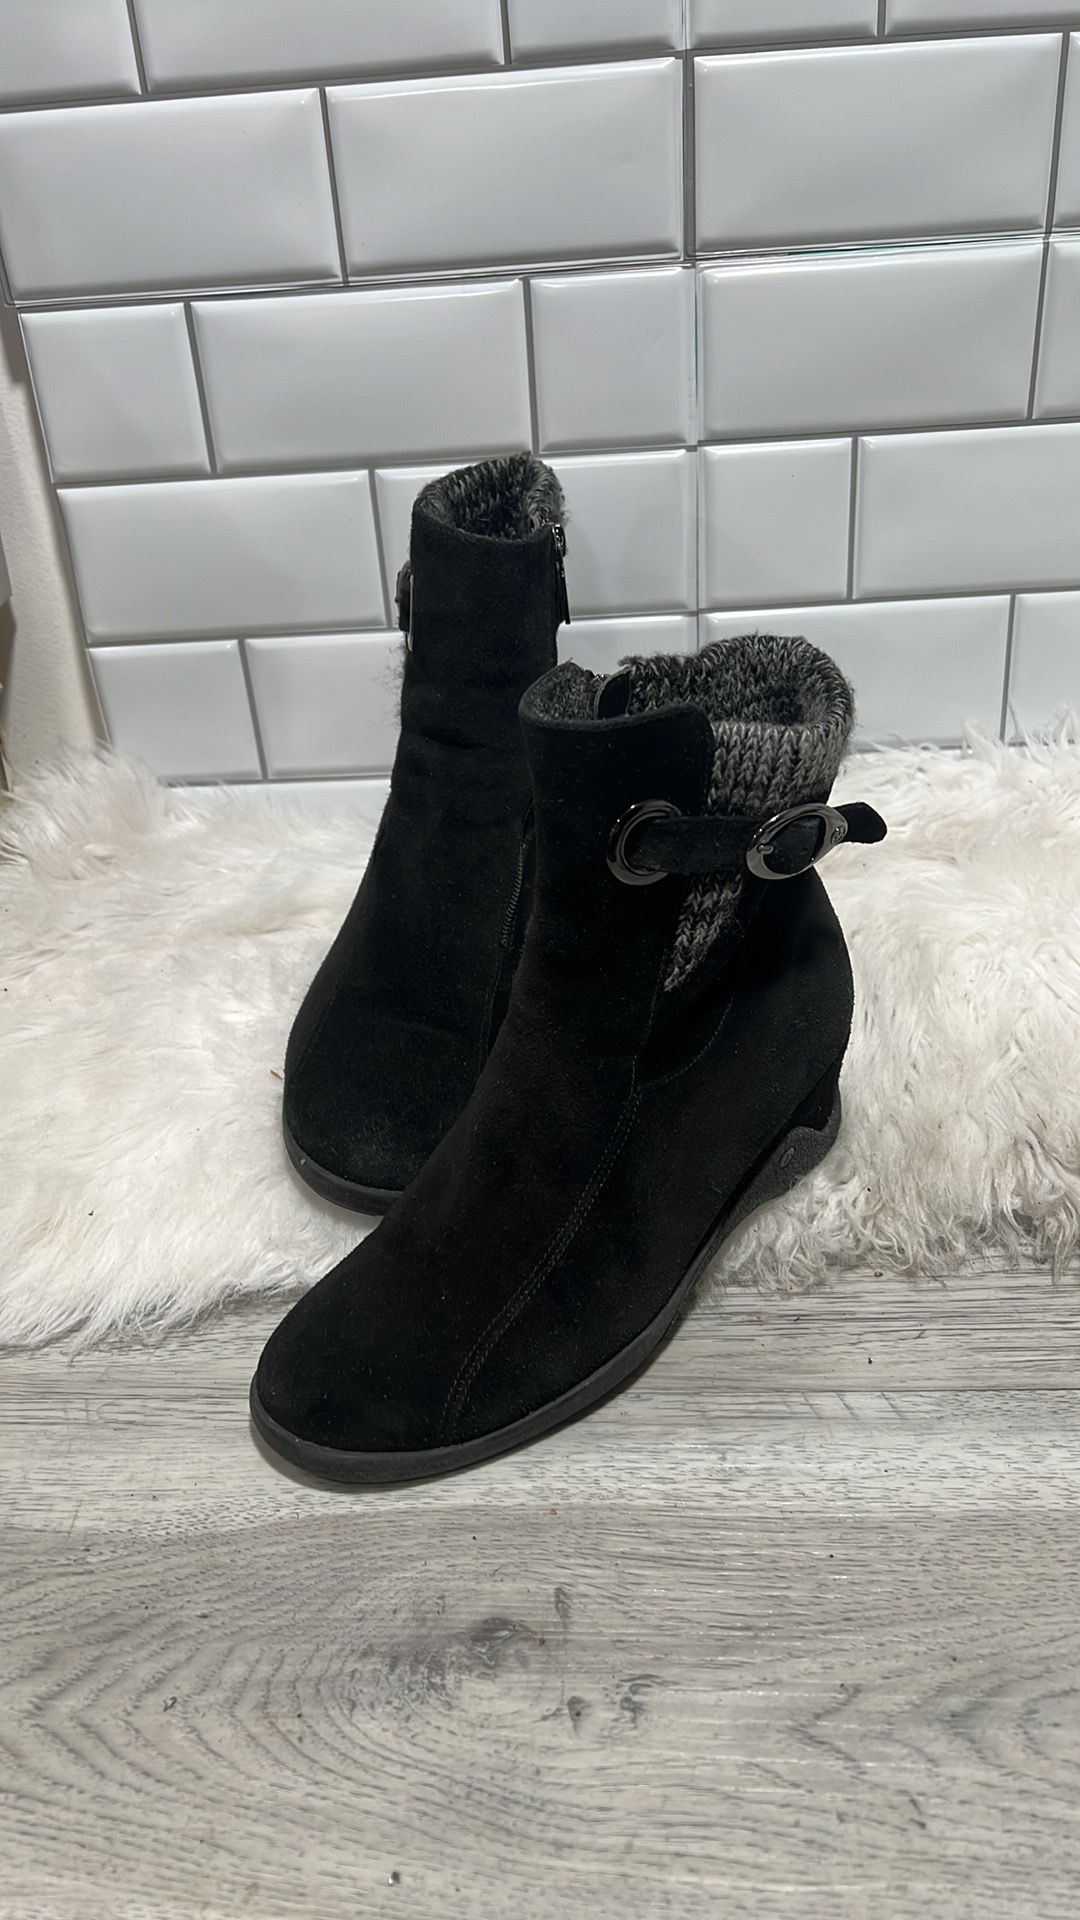 BLONDO black   Ankle Boots Waterproof Suede Leather Bootie Winter size 8 W